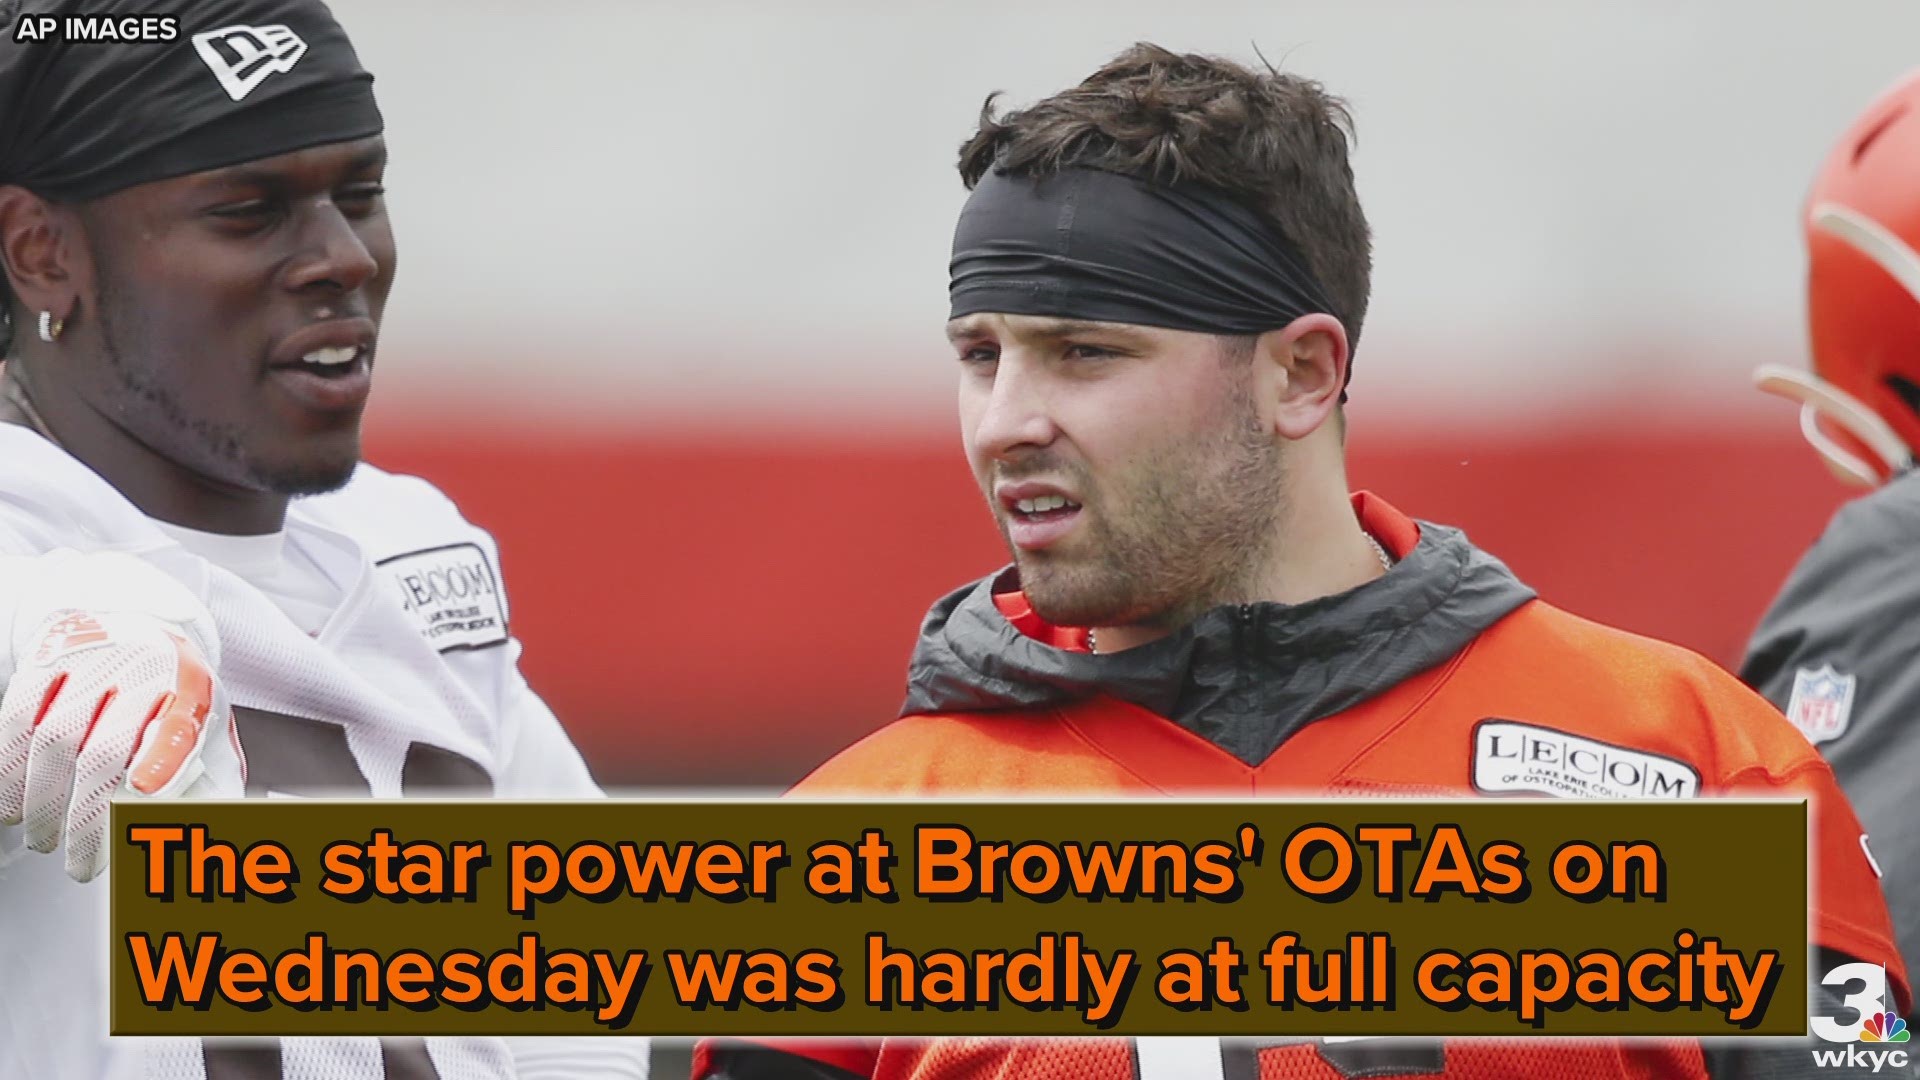 Speaking to reporters on Wednesday, Cleveland Browns offensive coordinator Todd Monken discussed what he's seen from his new quarterback, Baker Mayfield.